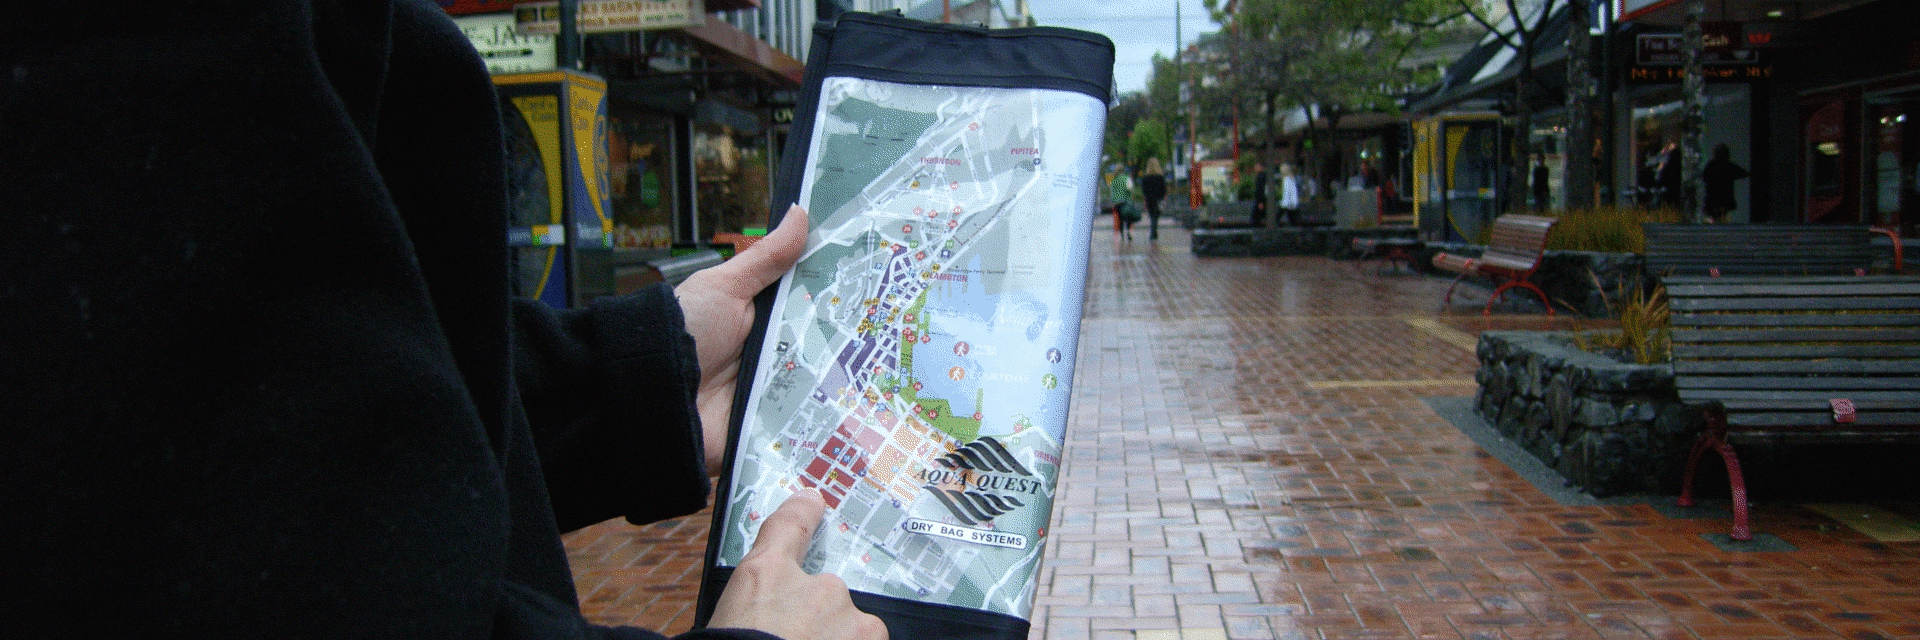 map in document dry bag on rainy day